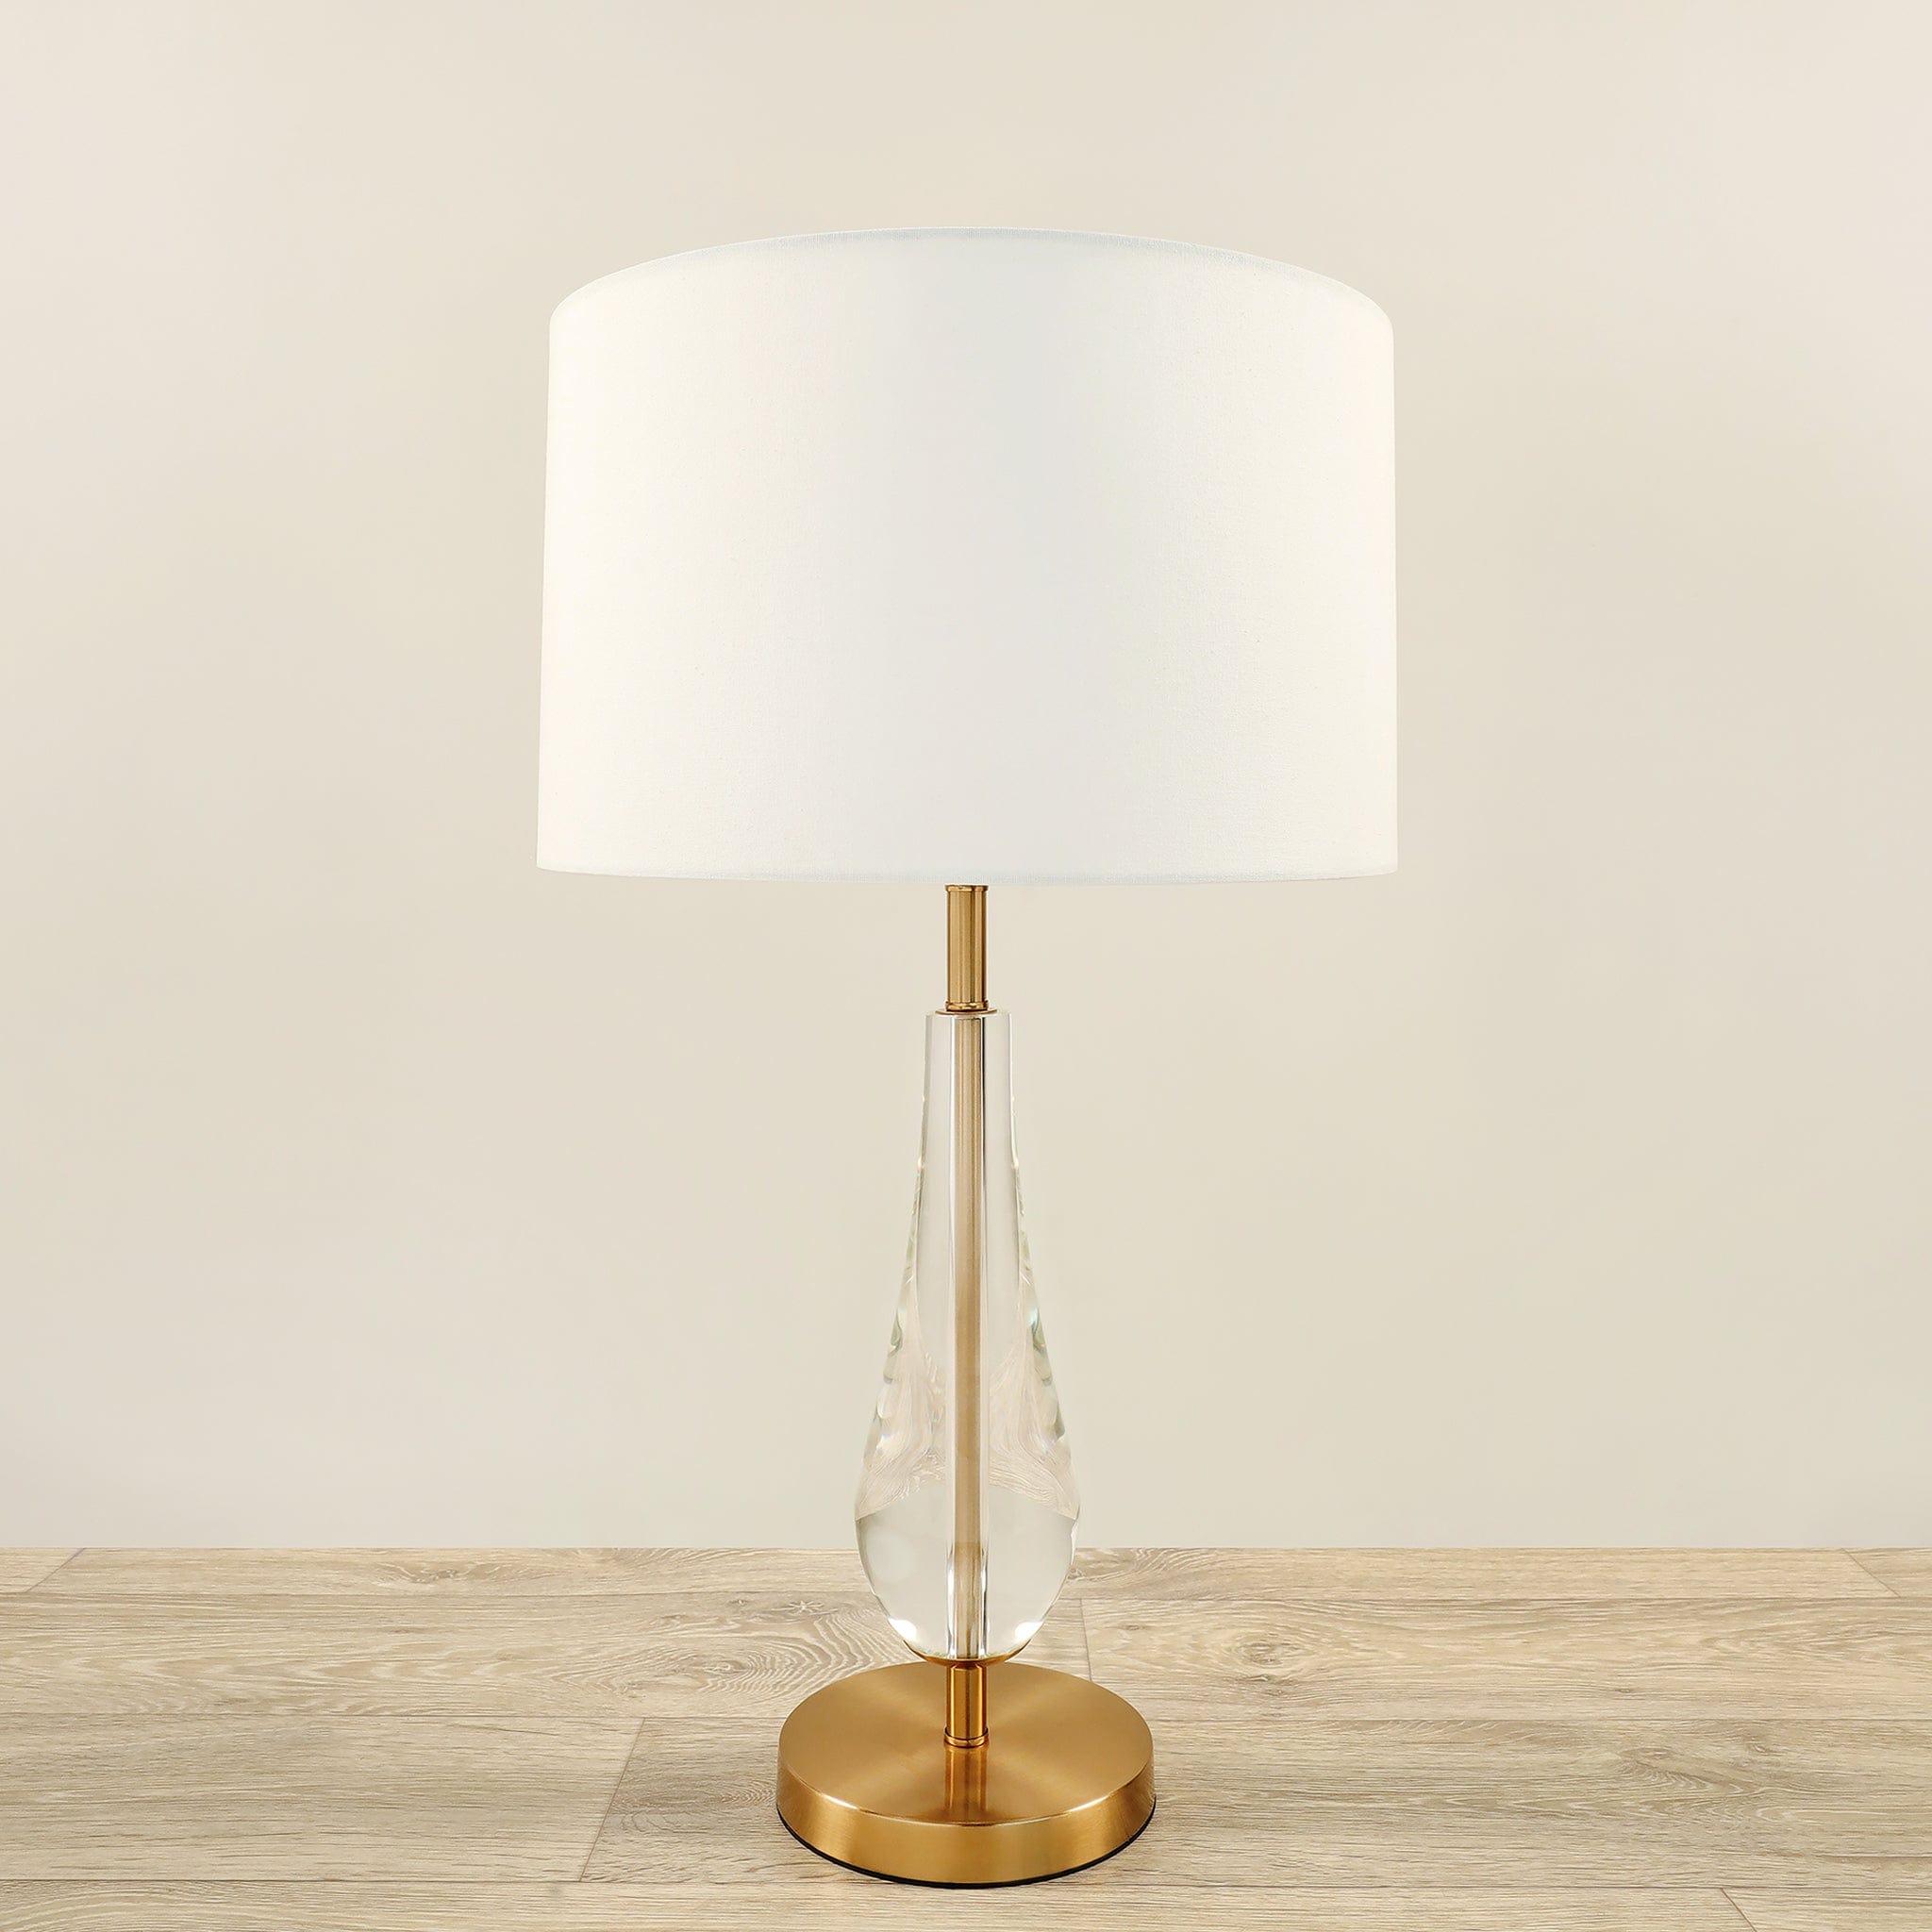 Glass Table Lamp - Bloomr